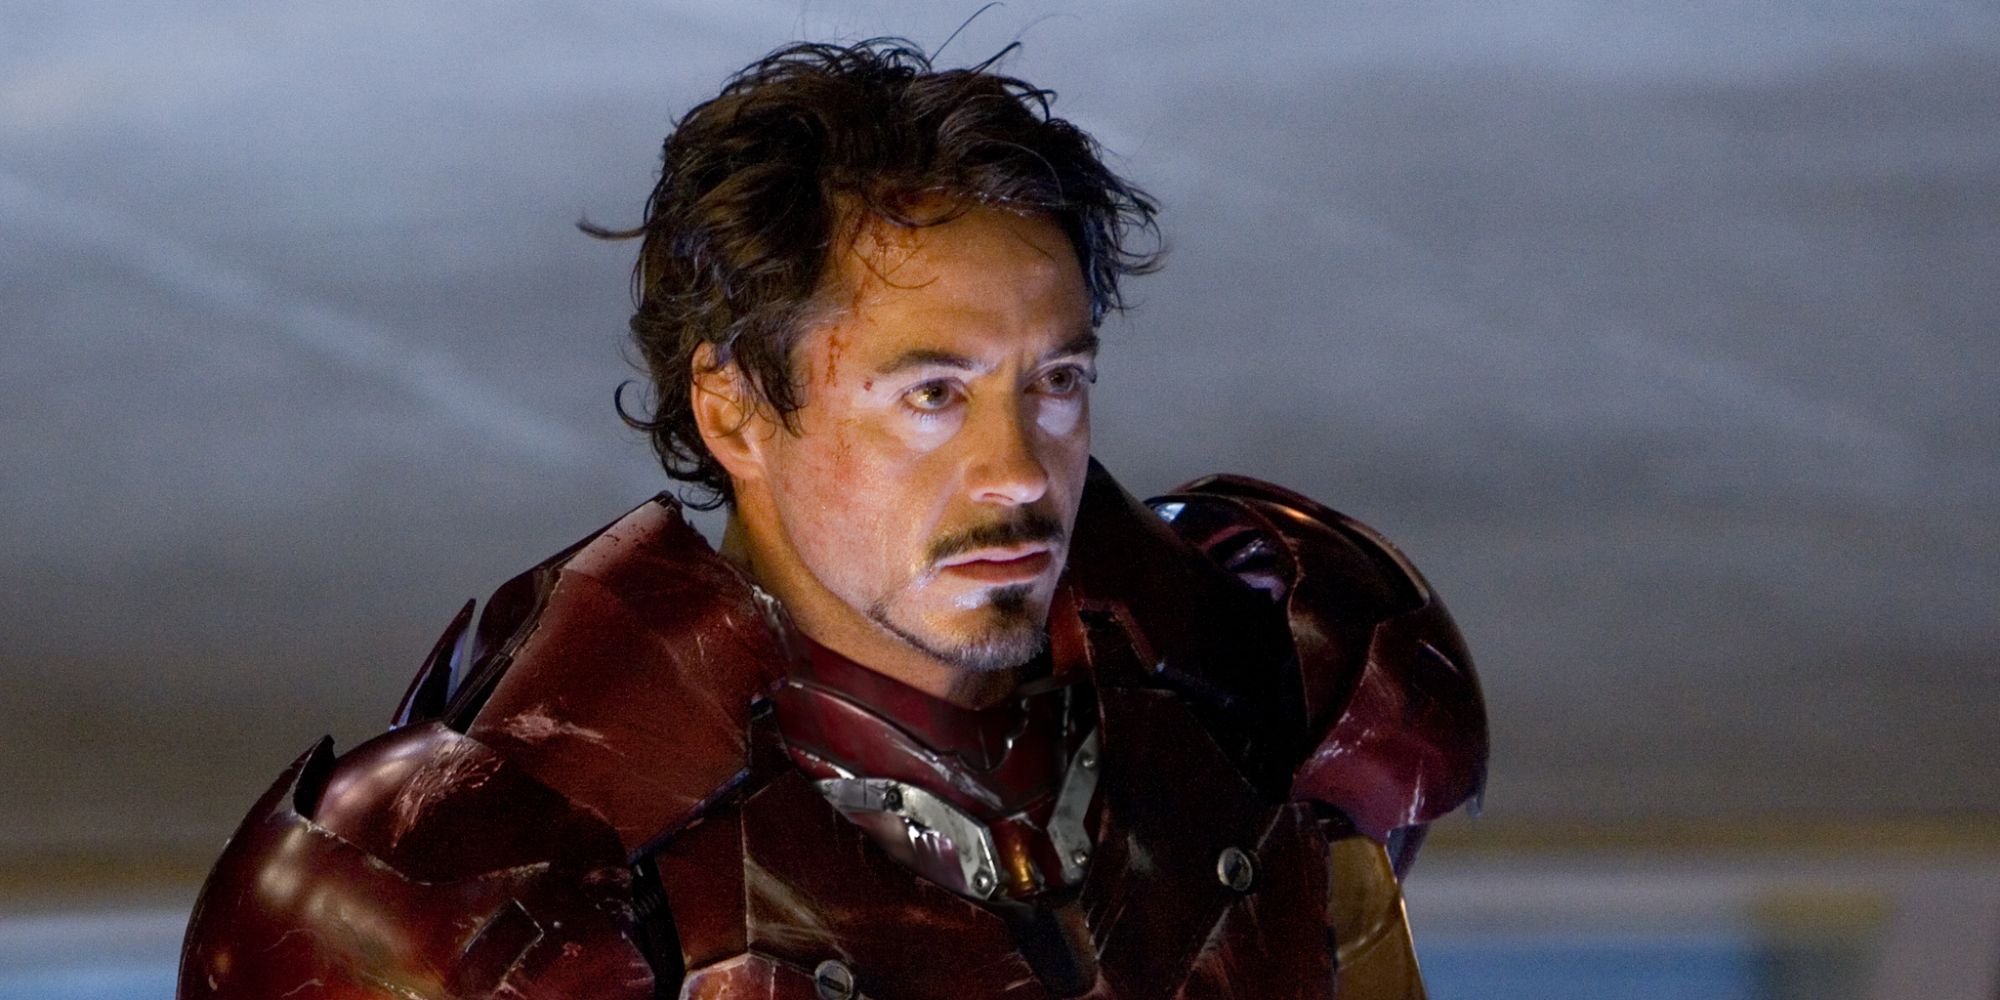 Robert Downey Jr. as Iron Man without his helmet in ‘Iron Man’